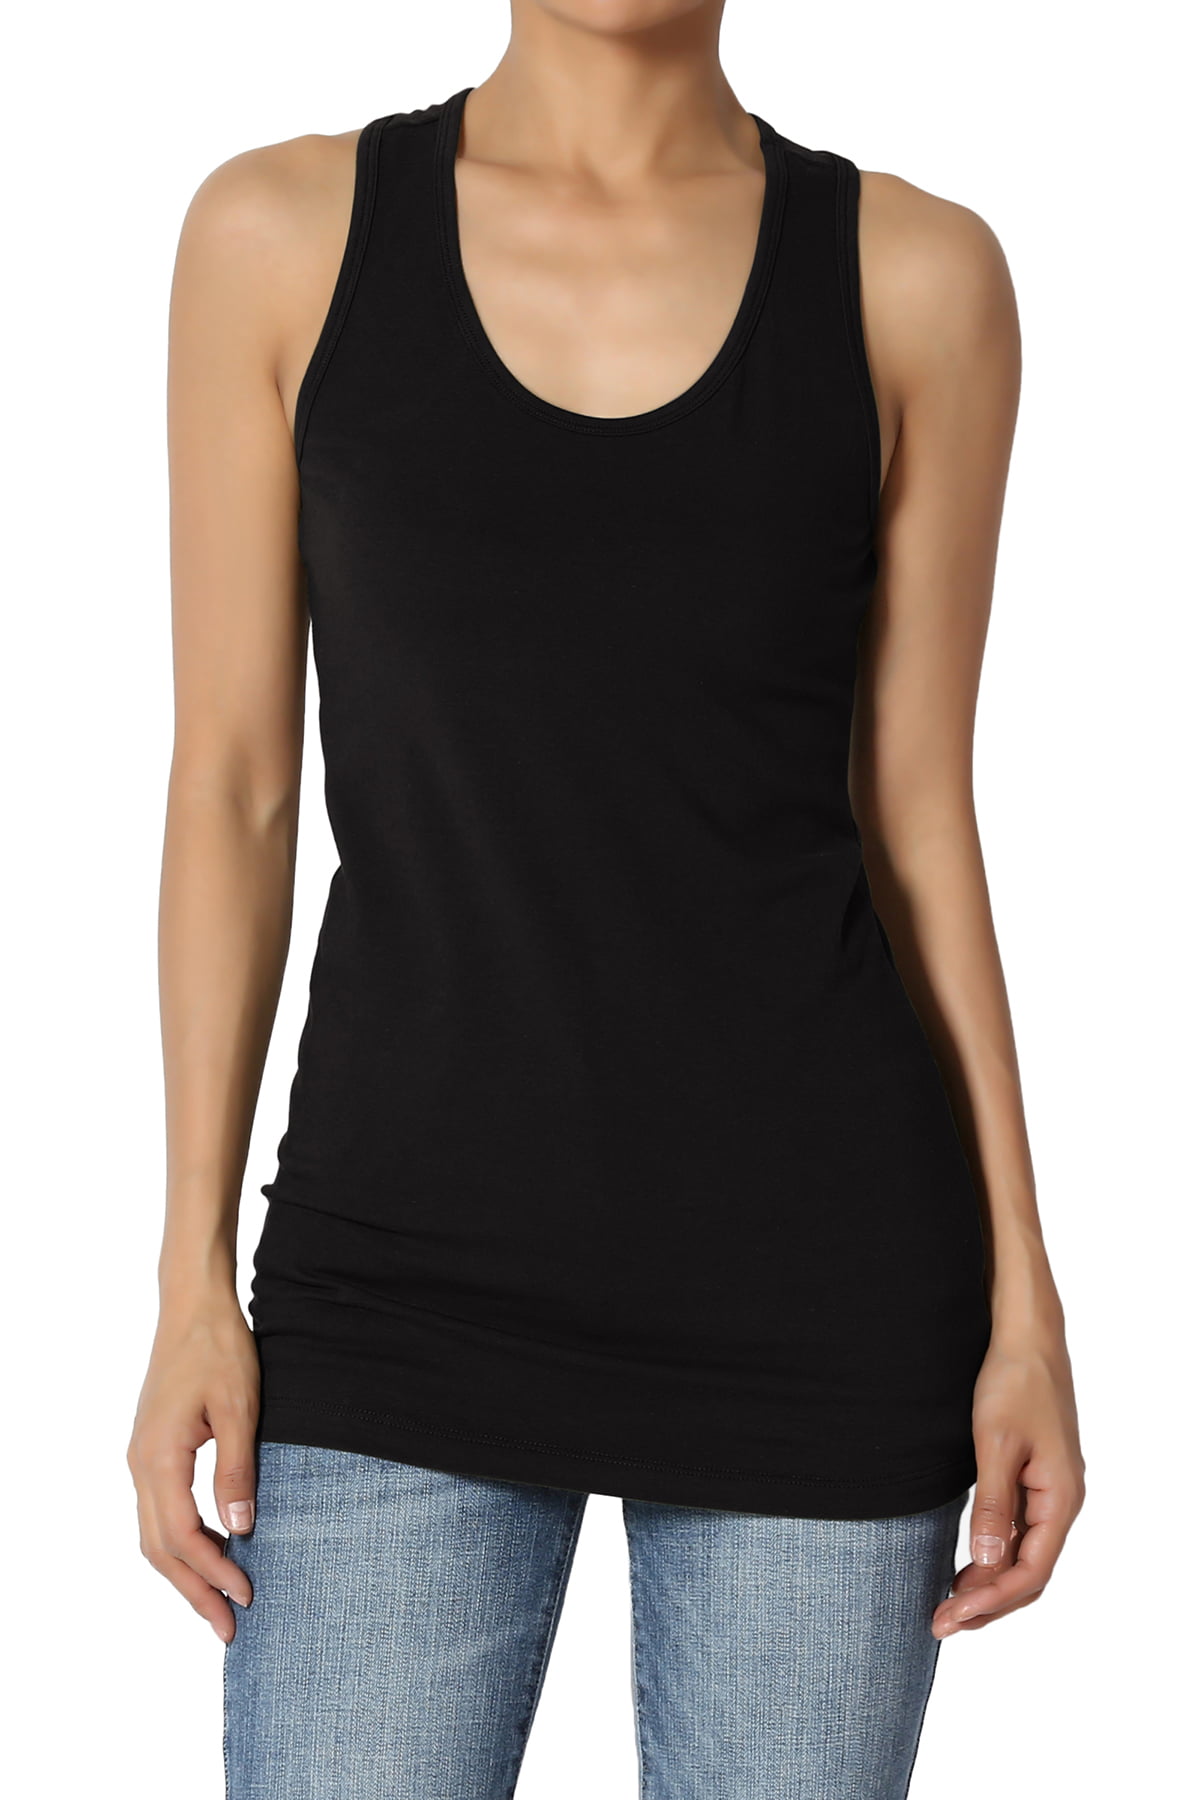 Women's SOFRA 100% Cotton Ribbed Rib A-Shirts Tank Tops Style TT200 Only $4.99 